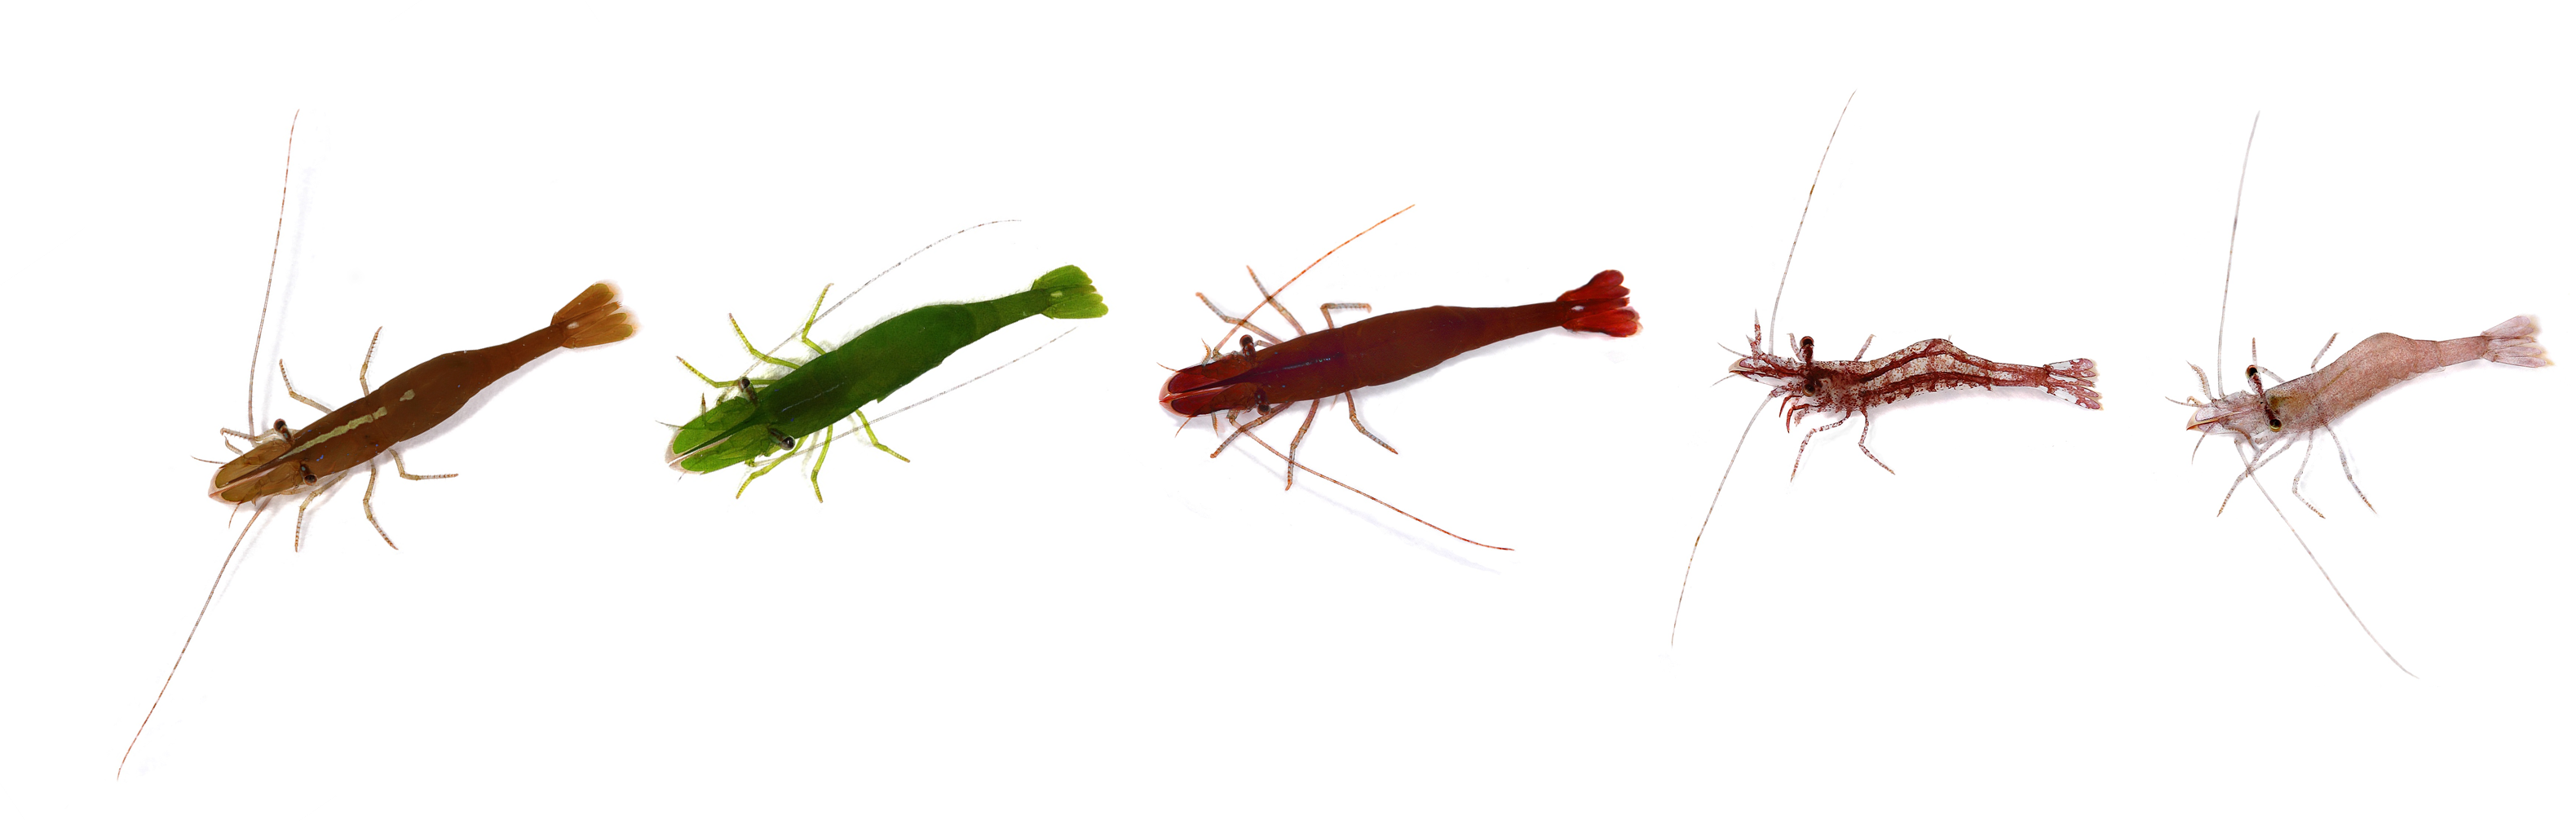 My Exeter PhD: Camouflage helps brightly coloured chameleon prawns to survive in the rock pools